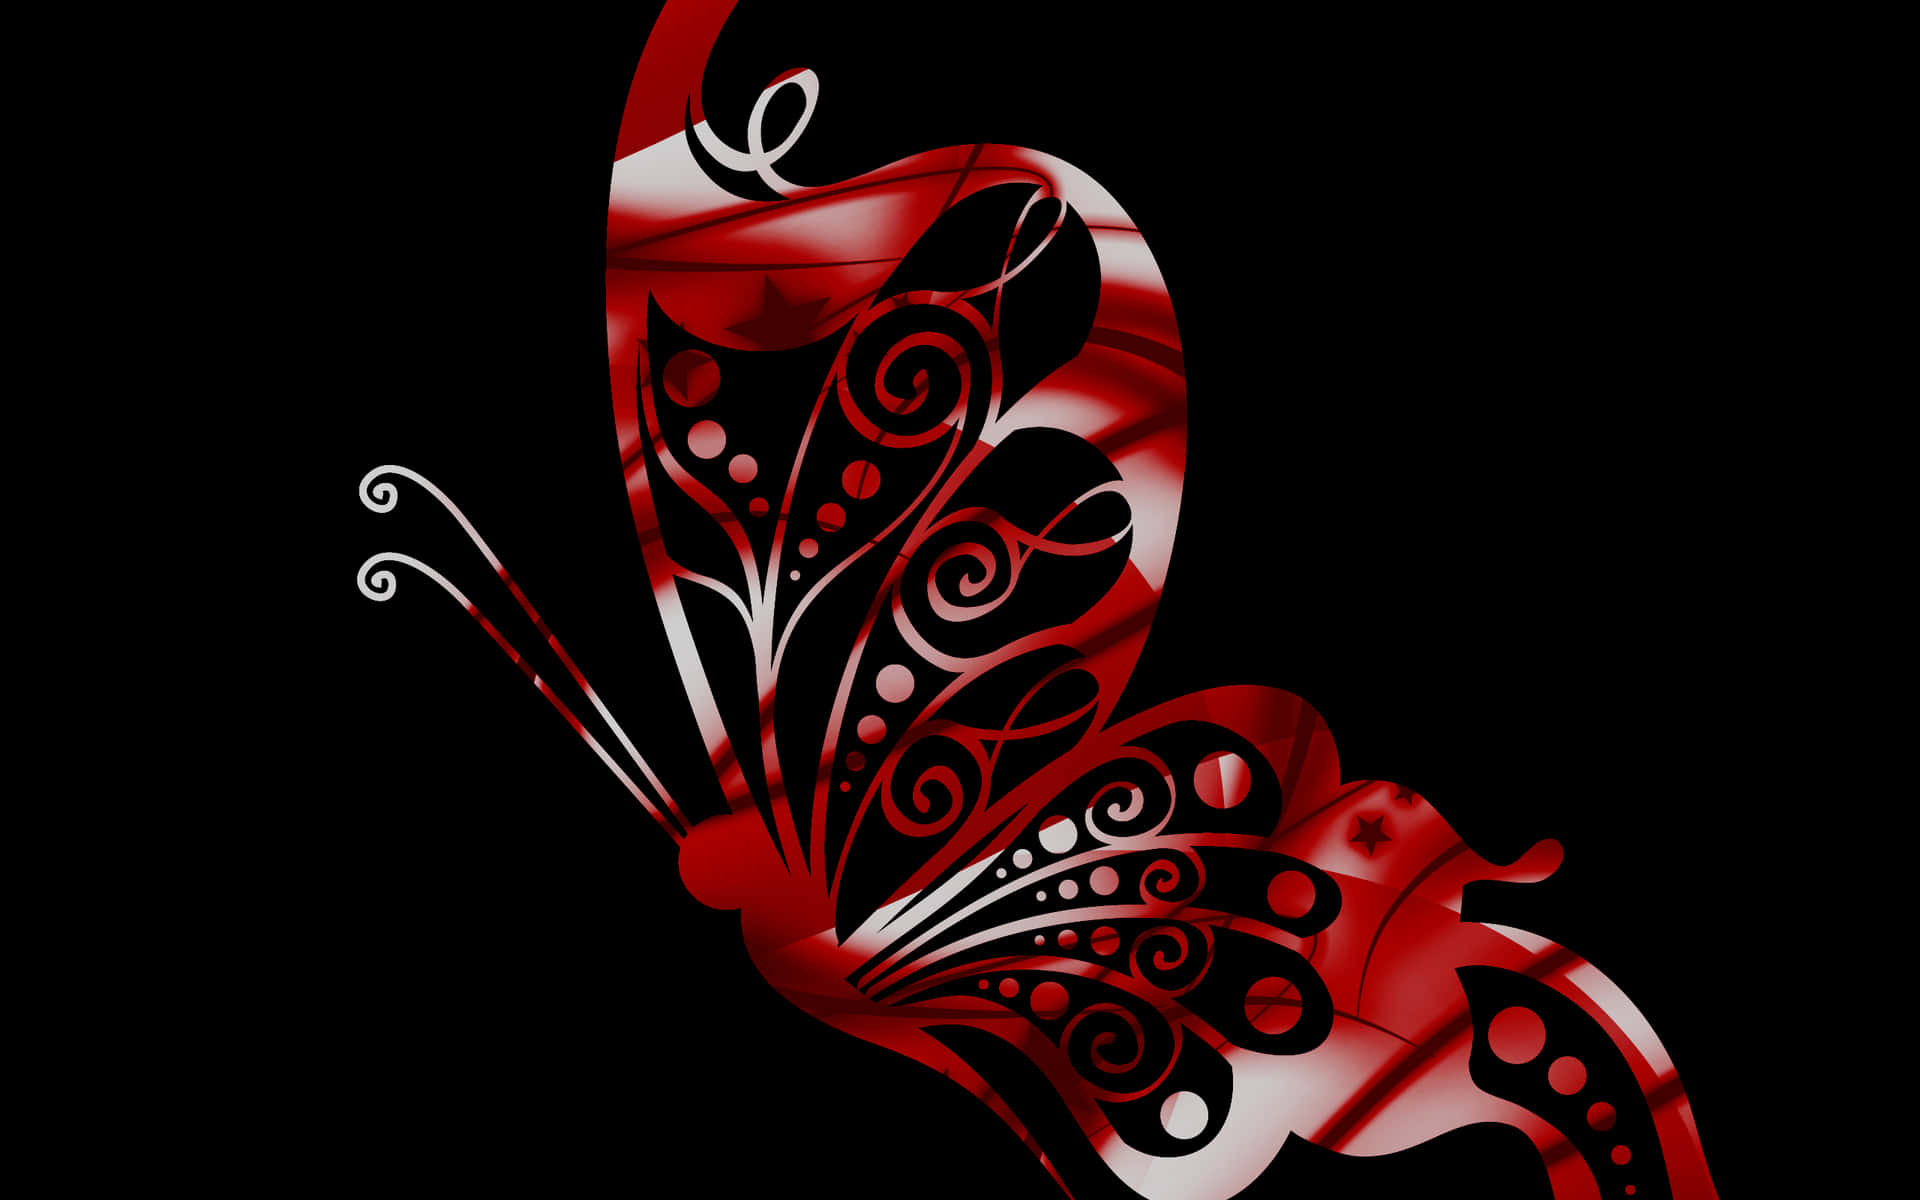 Take Flight and Follow Your Dreams with the Beautiful Red Butterfly Wallpaper